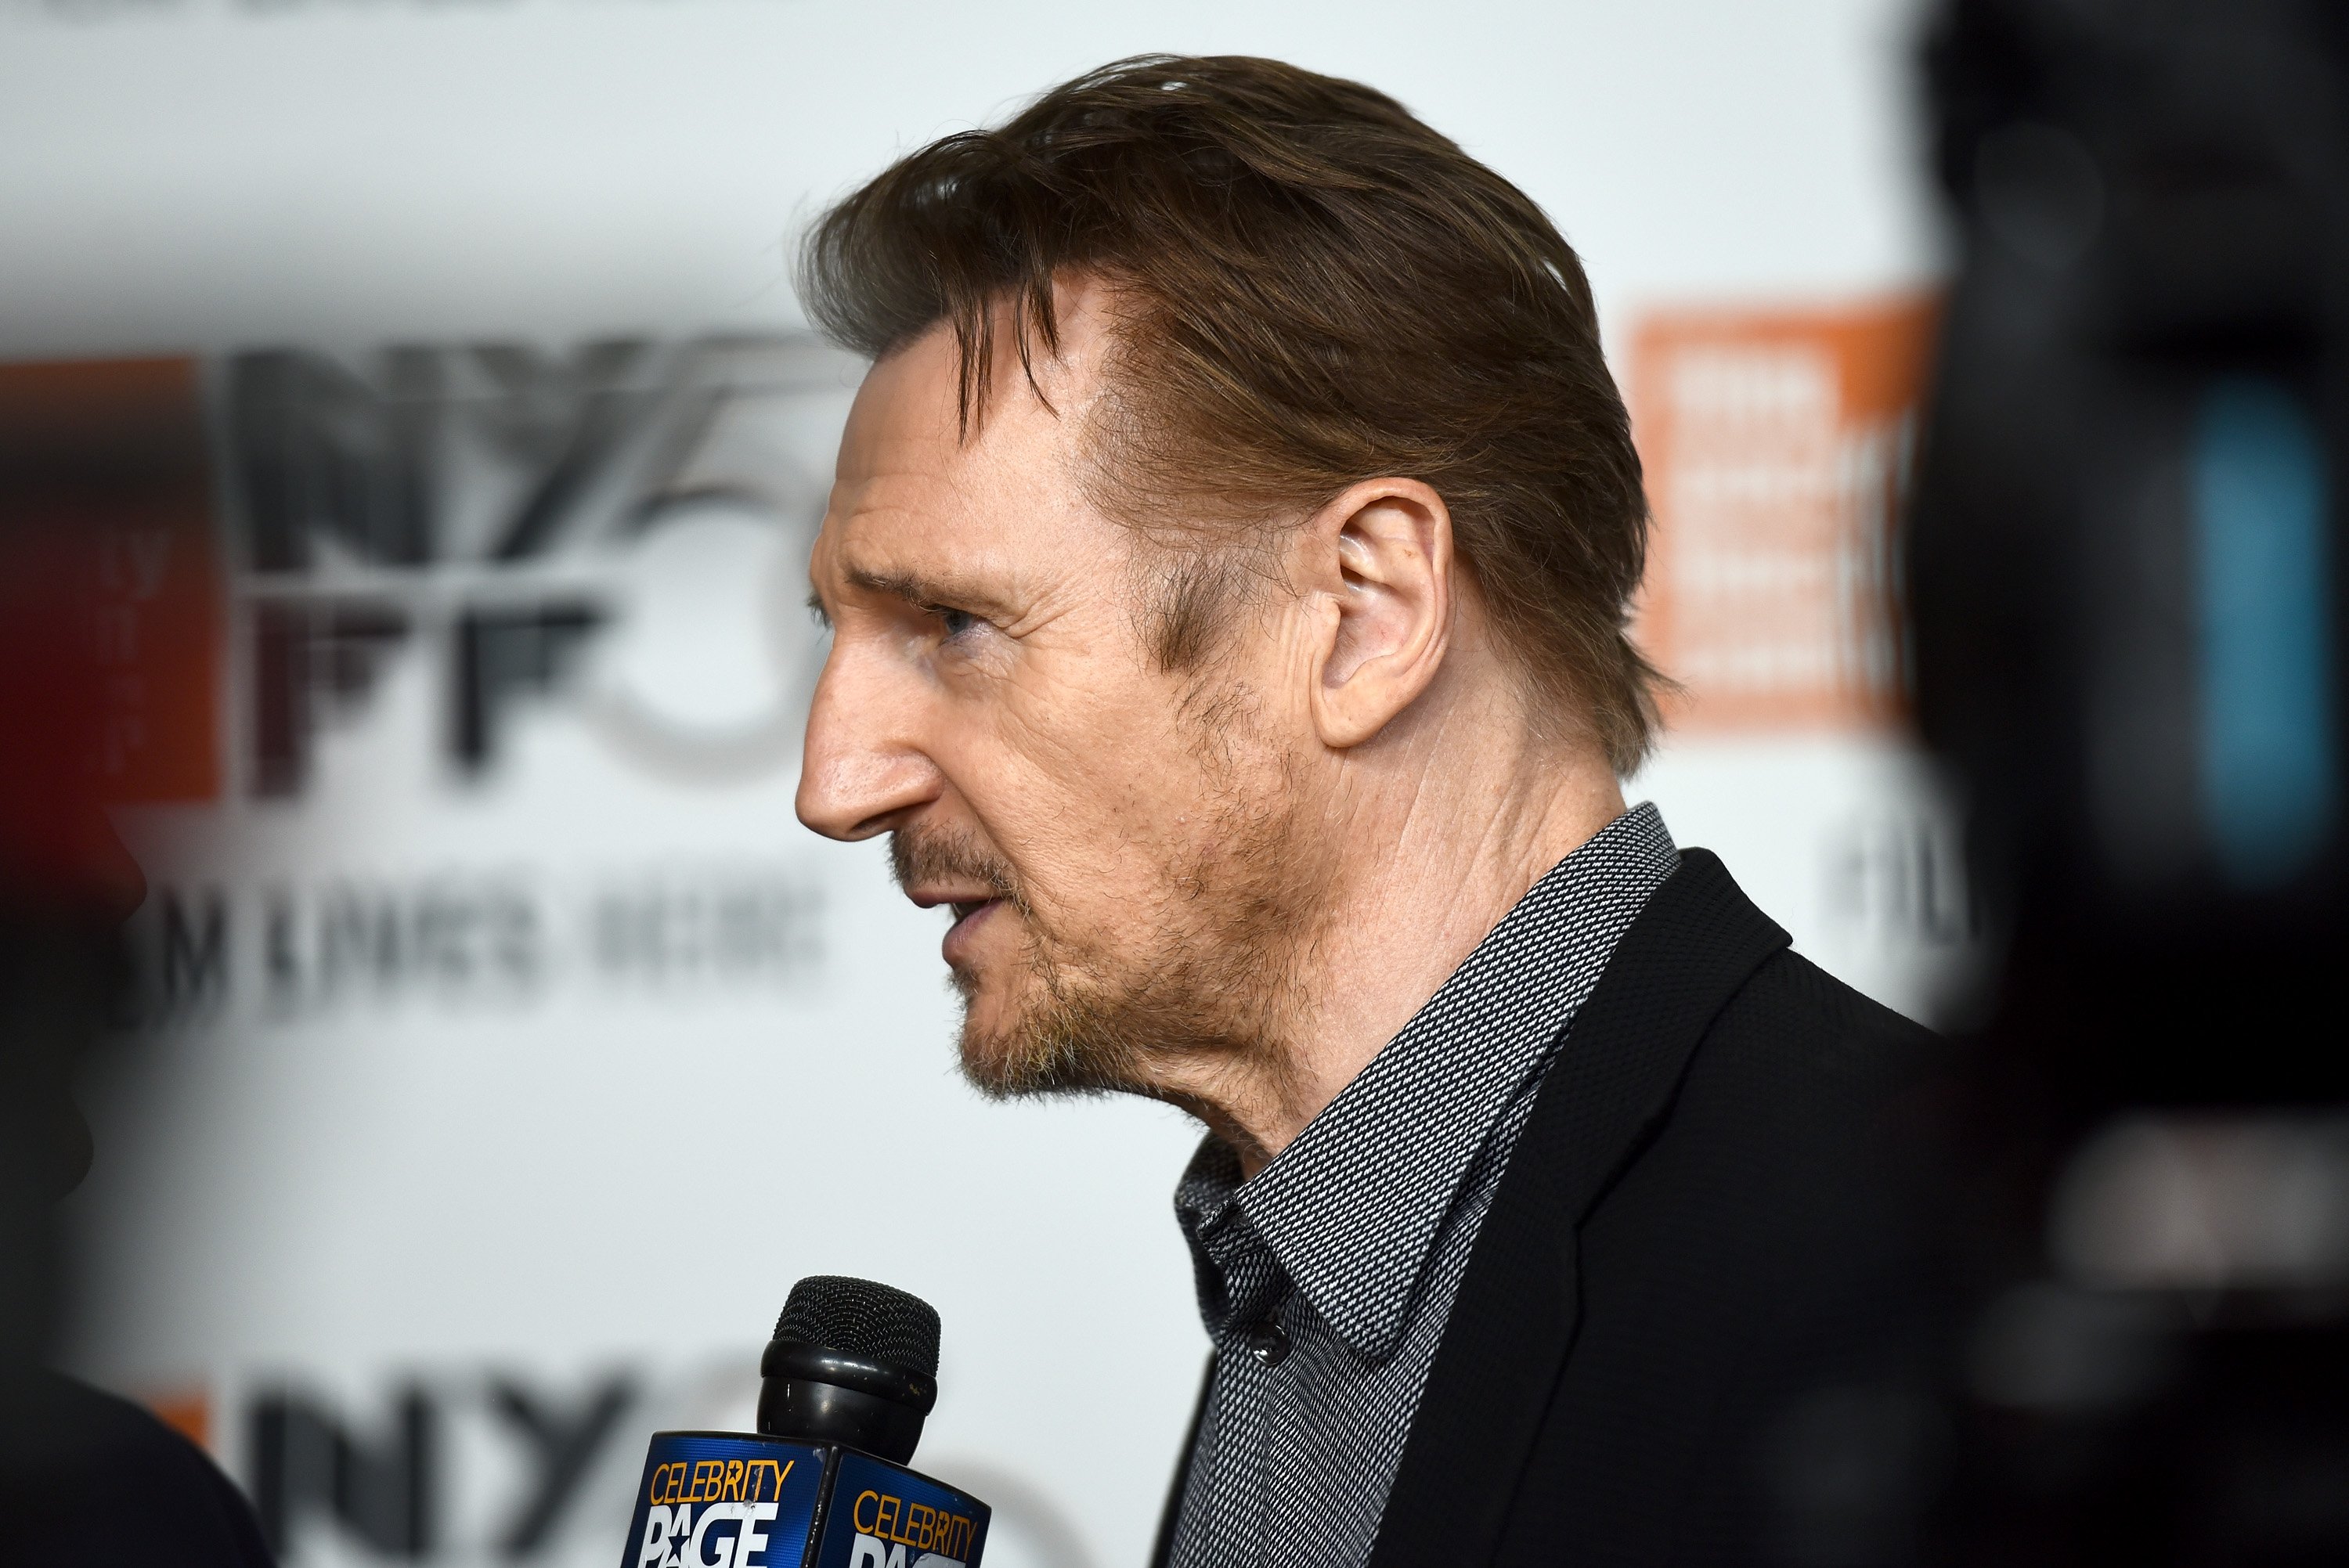 Liam Neeson at the premiere of "The Ballad of Buster Scruggs" | Photo: Getty Images